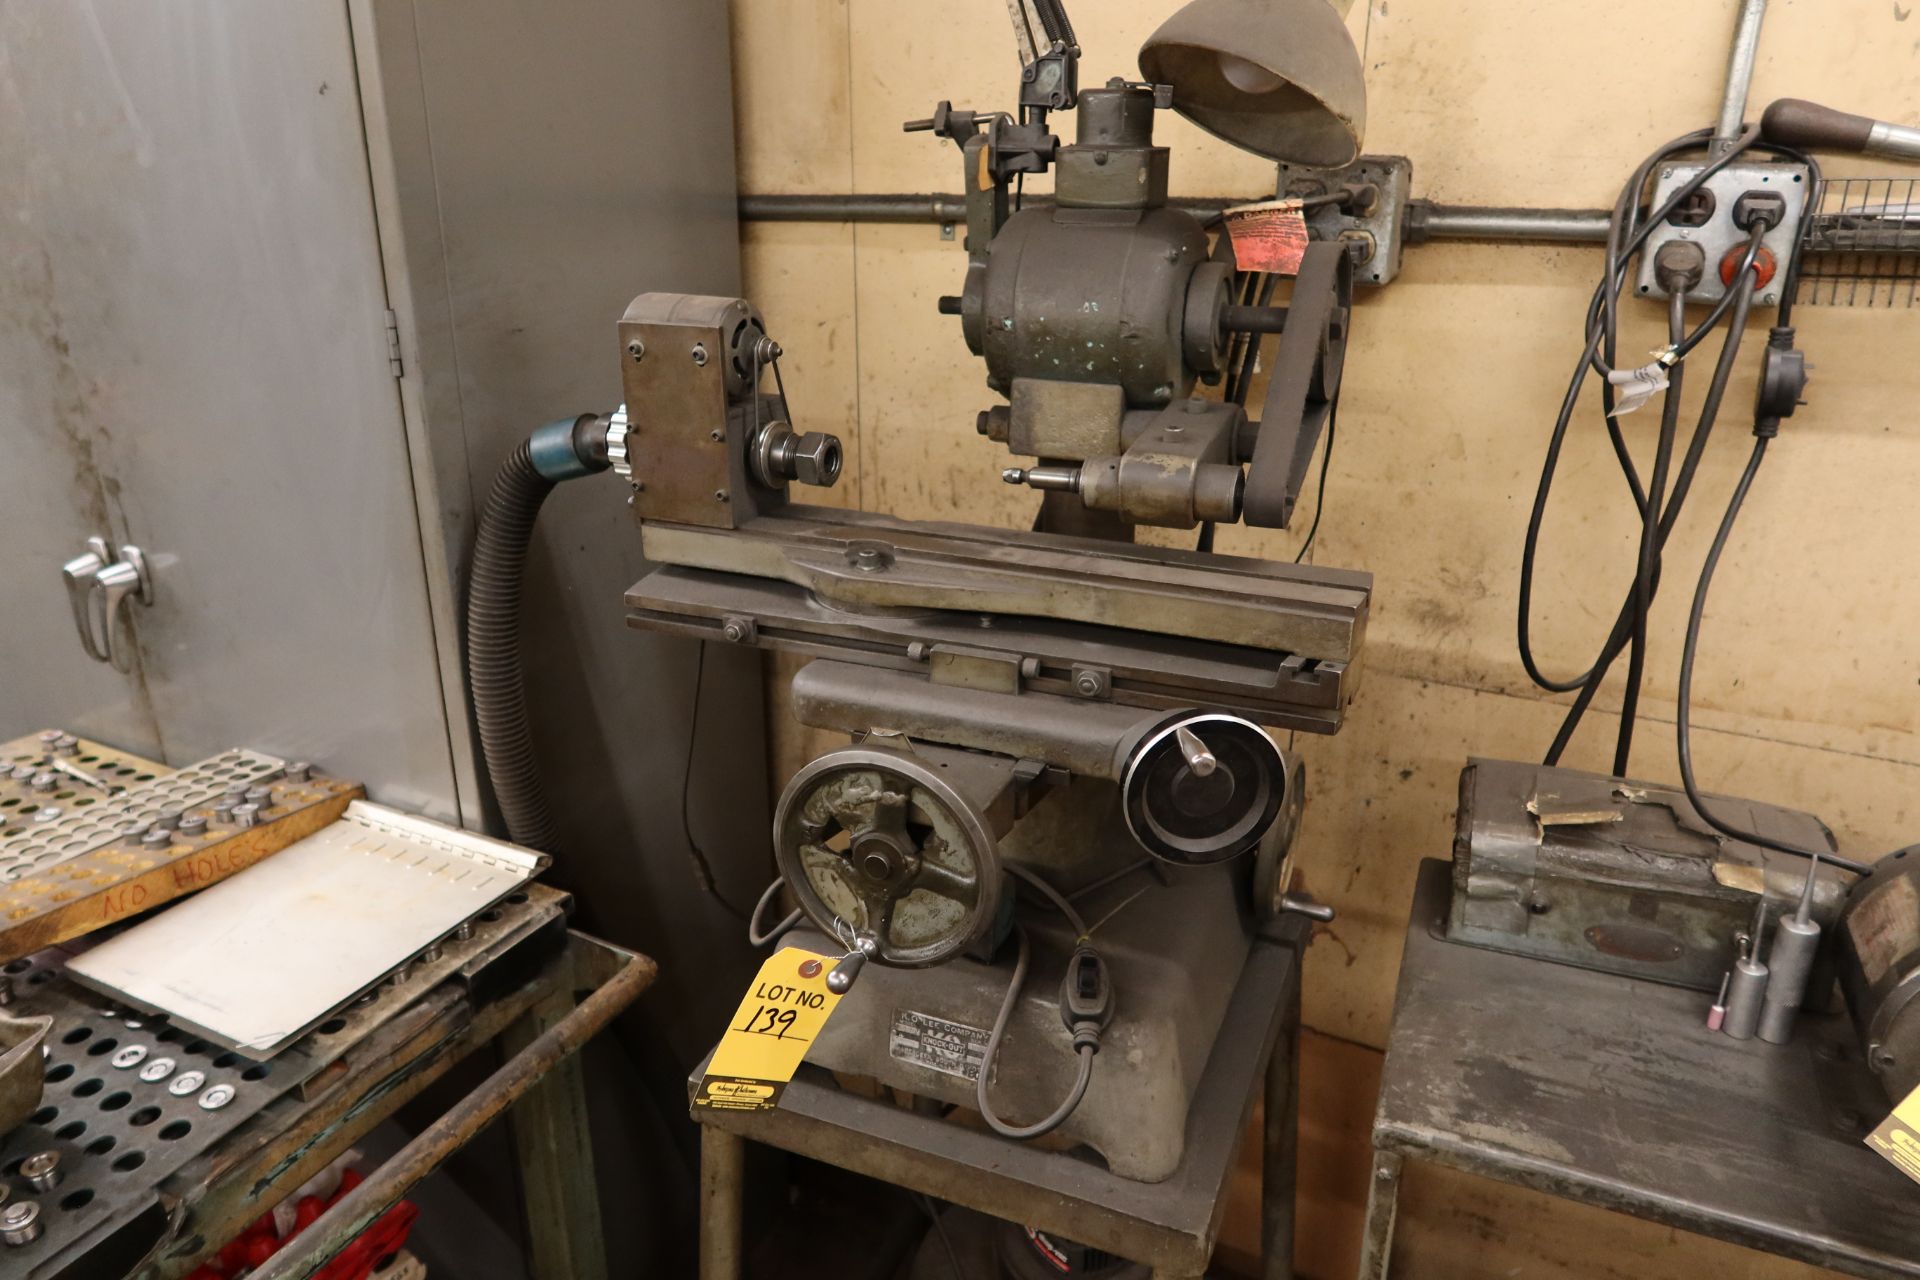 KNOCK-OUT MDL. A-600 21" TOOL 7 CUTTER GRINDER SN. 1870